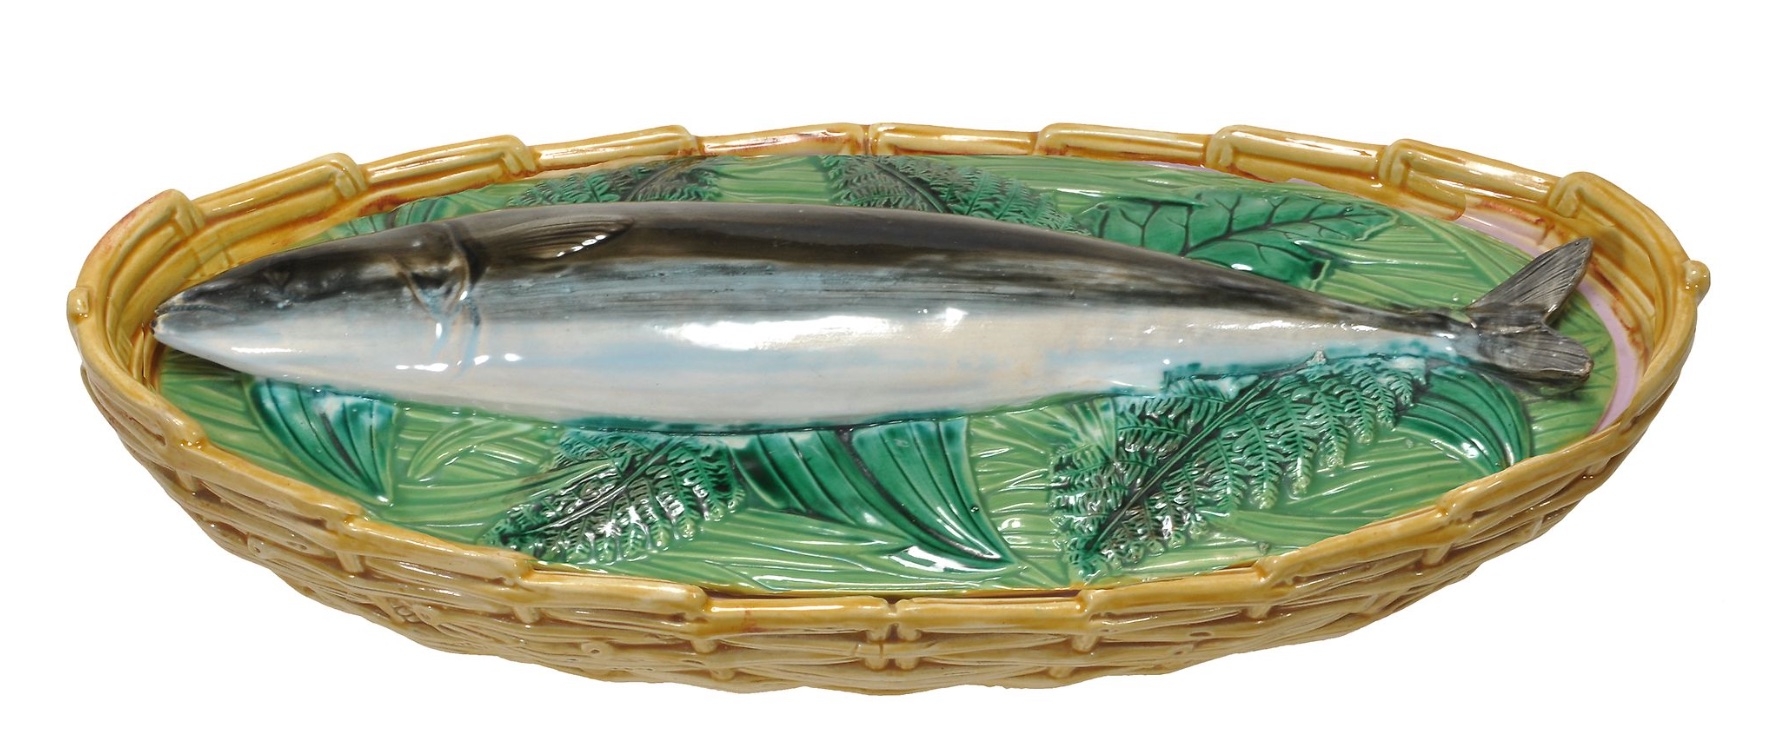 A George Jones majolica mackerel oval fish tureen and cover, circa 1871, with ochre ozier-moulded - Image 2 of 6